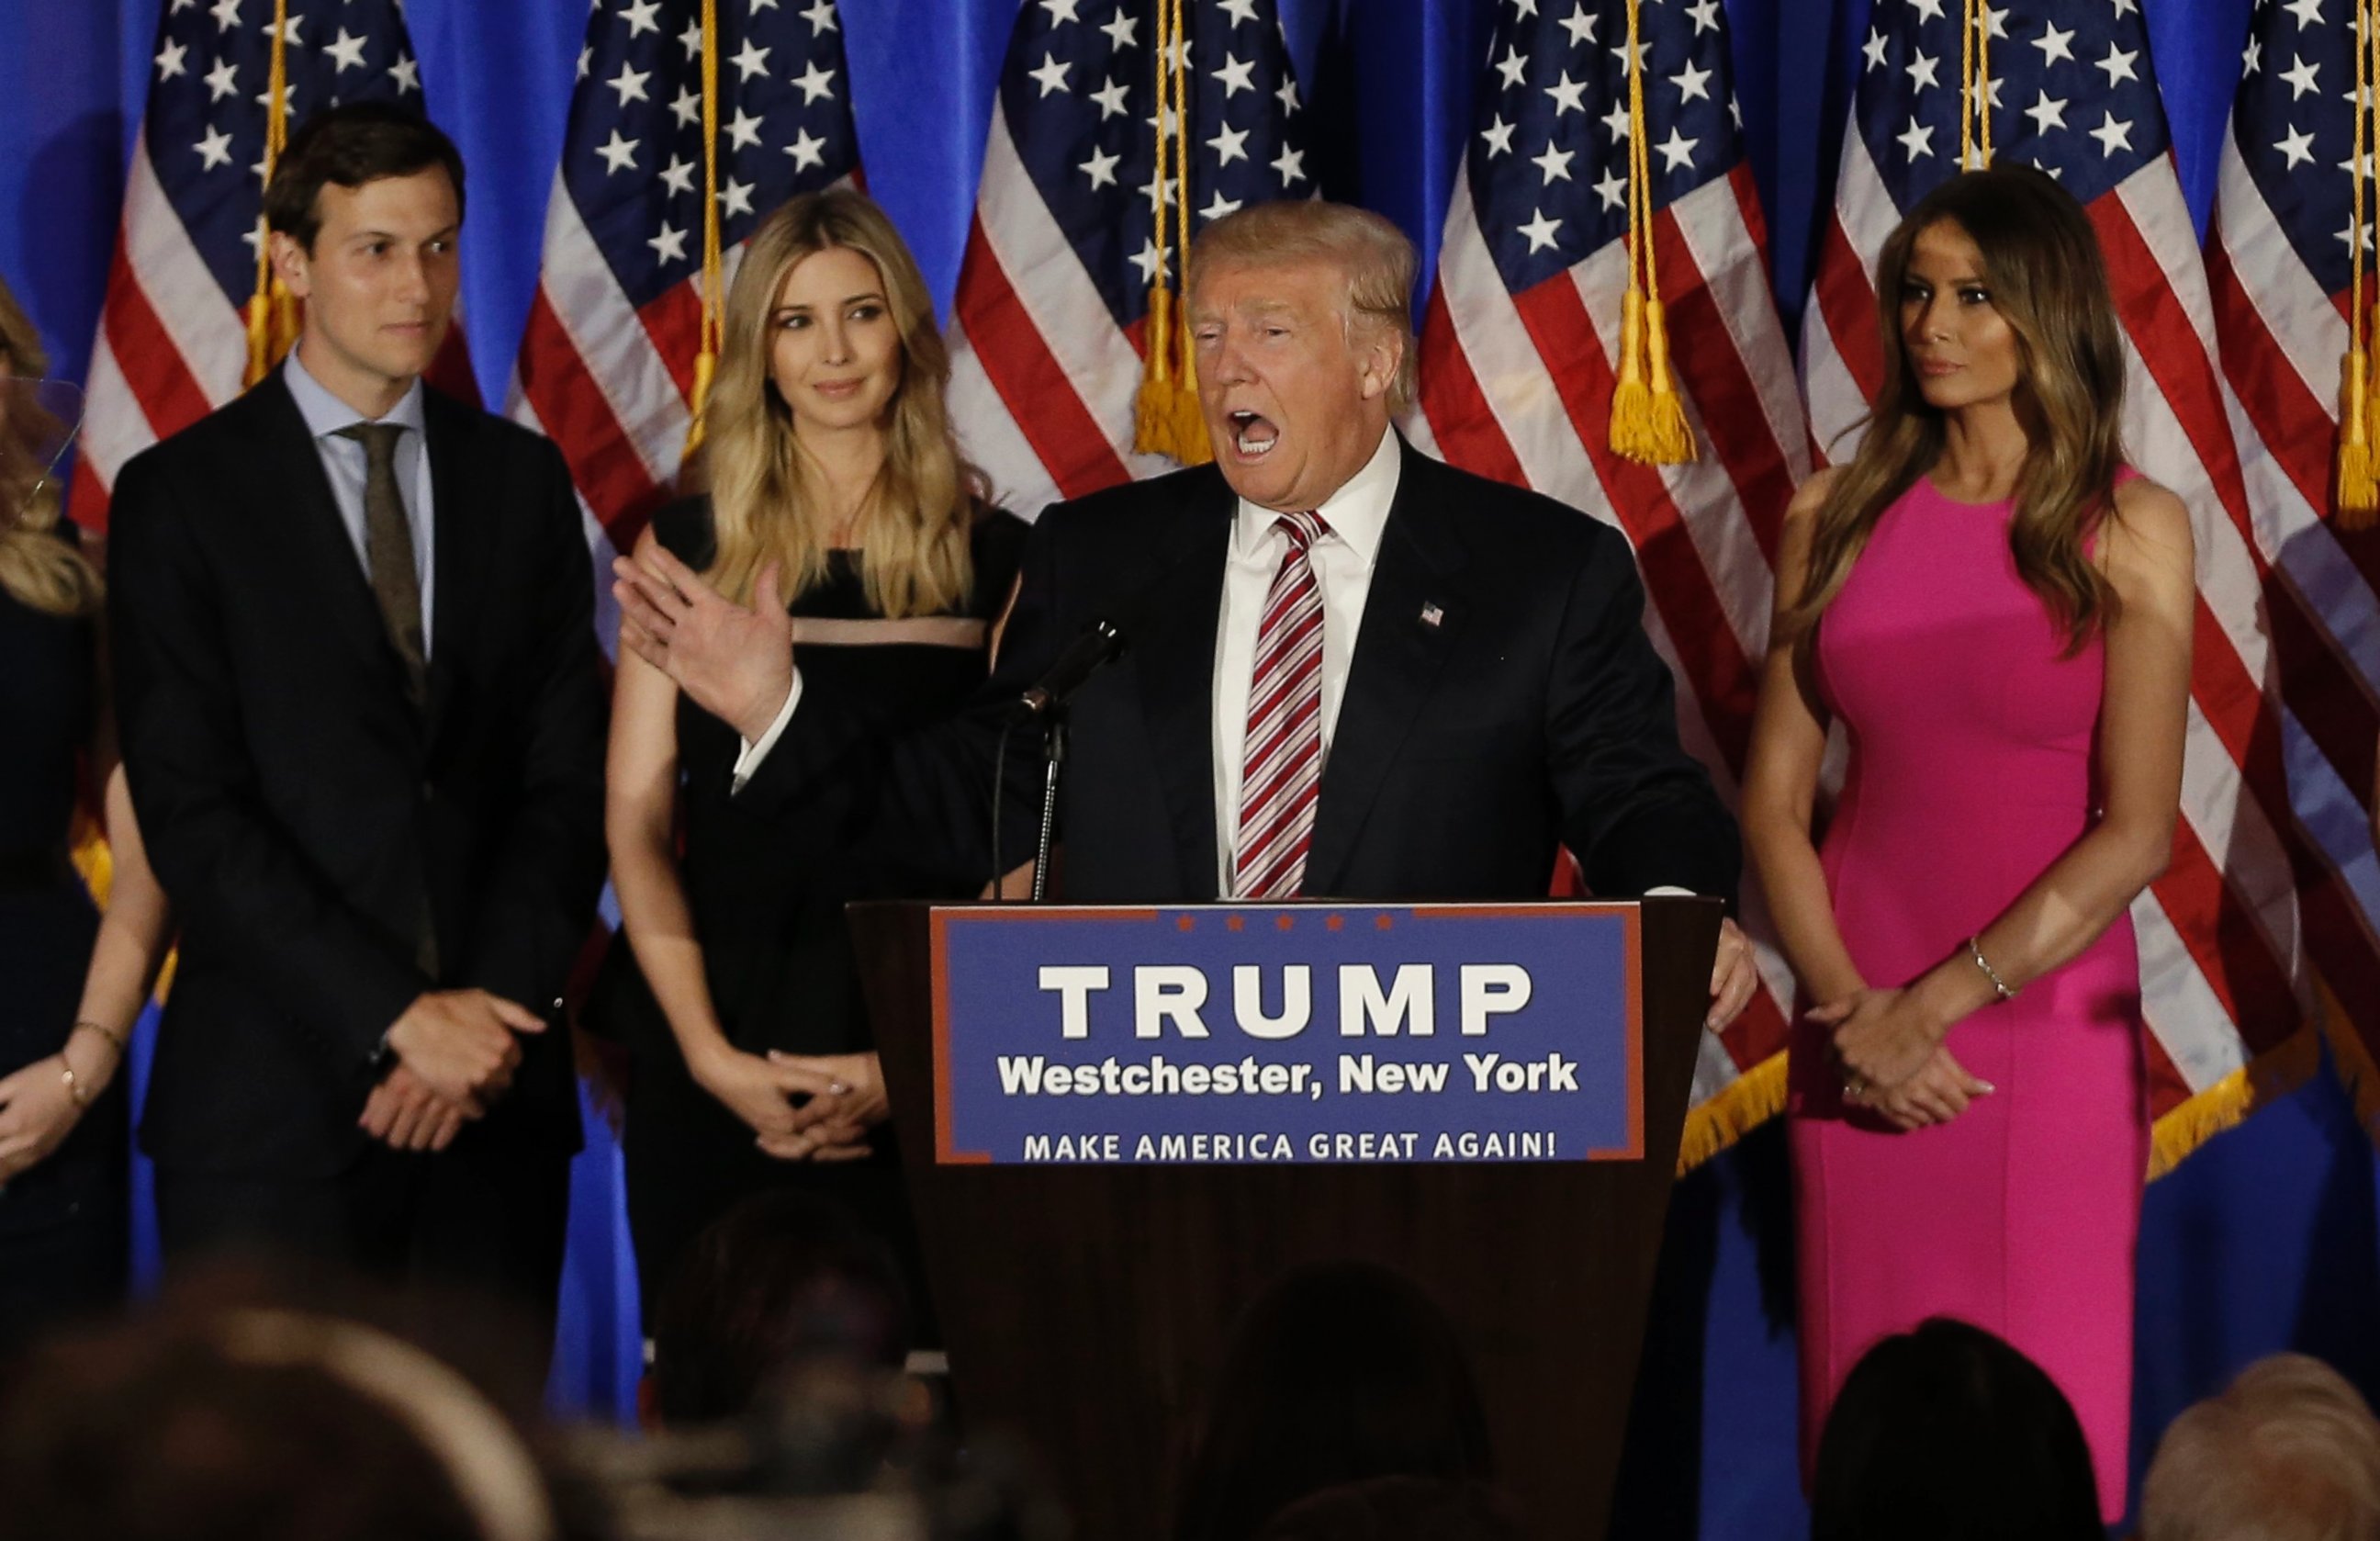 PHOTO: Republican U.S. presidential candidate Donald Trump speaks as his son-in-law Jared Kushner (L), daughter Ivanka (2nd from L) and his wife Melania (R) listen at a campaign event in Briarcliff Manor, New York, June 7, 2016.  